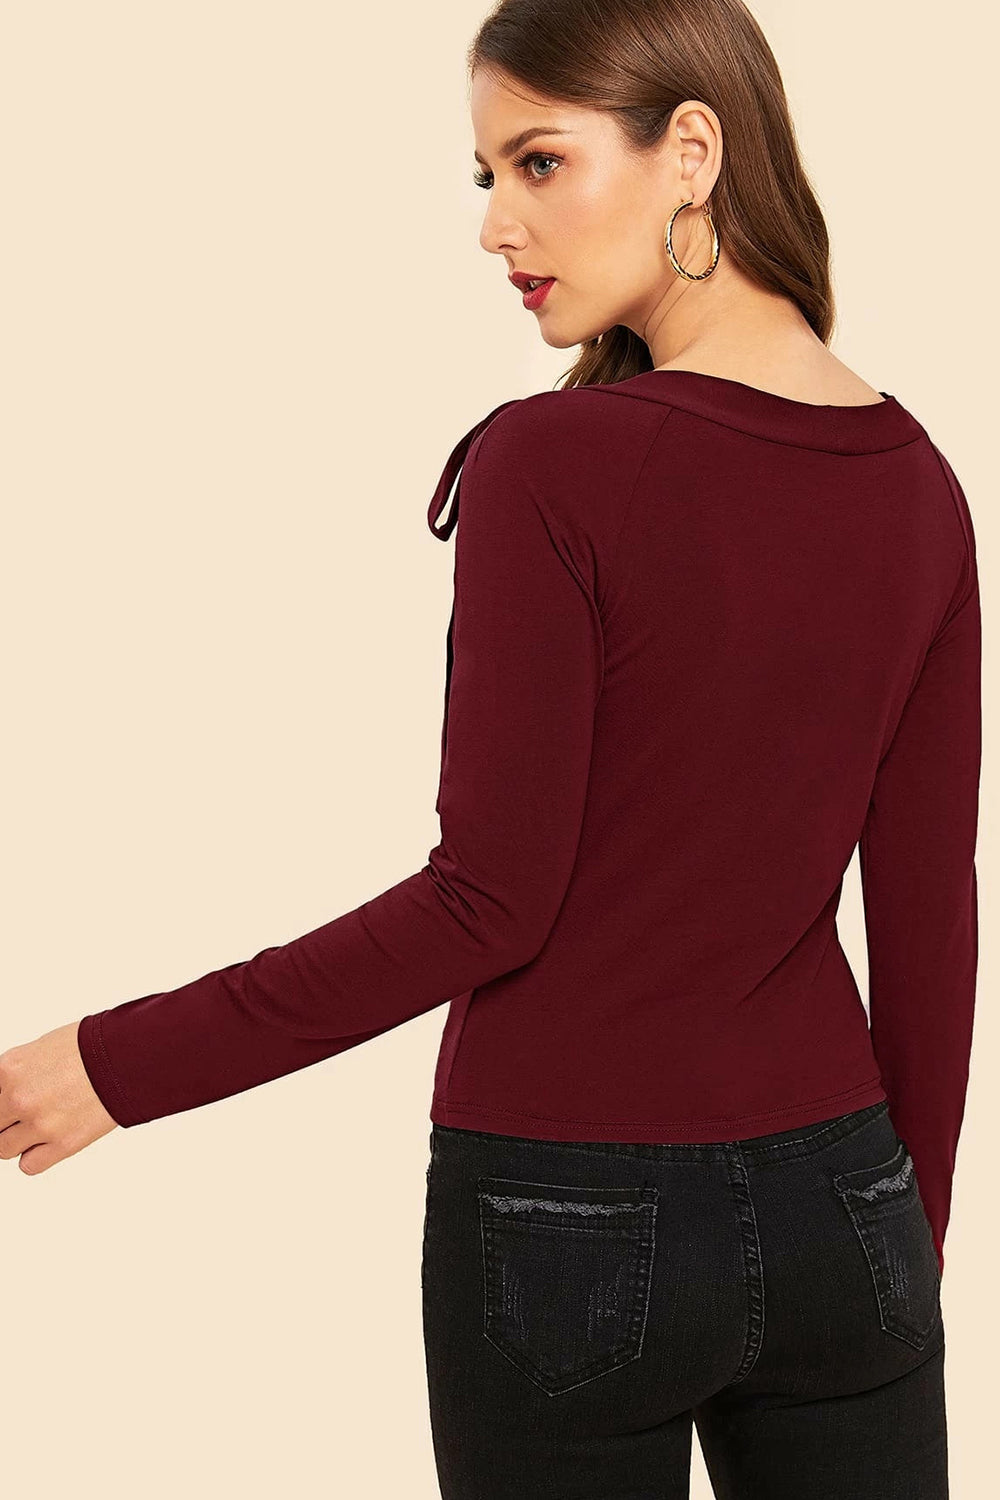 Knot Maroon Top